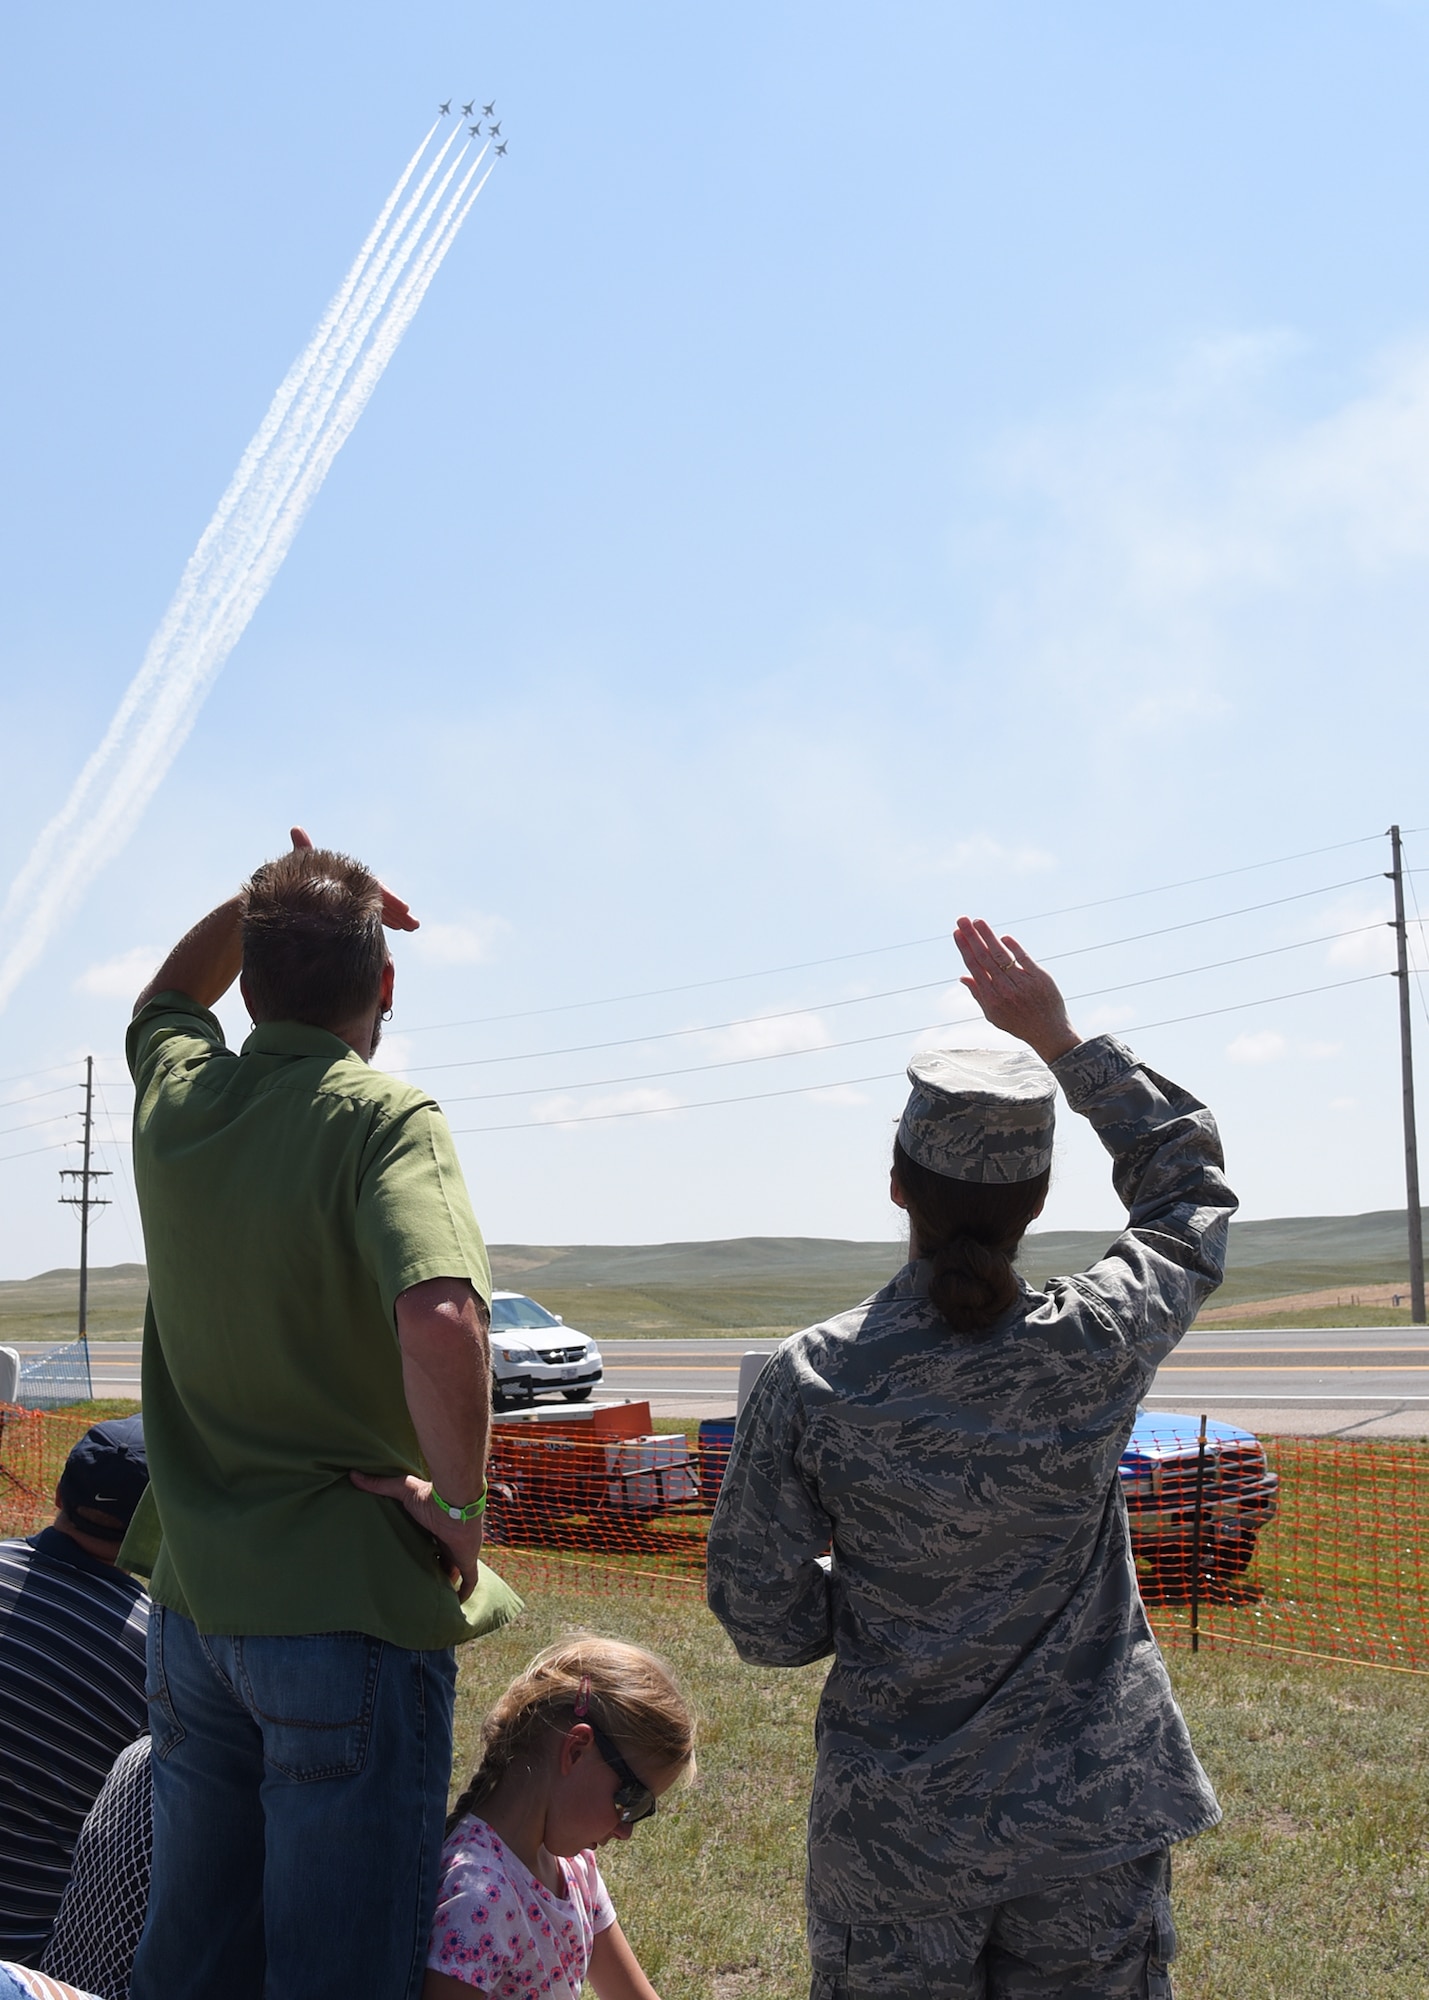 Colonel Stacy Jo Huser, 90th Missile Wing Commander, and spouse Tim O'Hara, watch the U.S. Air Force Thunderbirds perform a Delta formation during the Cheyenne Frontier Days Air Show in Cheyenne, Wyo., July 25, 2018. The Thunderbirds performed stunts such as the calypso pass and a maneuver in tribute to America's veterans and fallen heroes. The airshow provides a chance for the local community and worldwide visitors of CFD to see the U.S. Air Force in action over the skies of Cheyenne. (U.S. Air Force photo by Glenn S. Robertson)